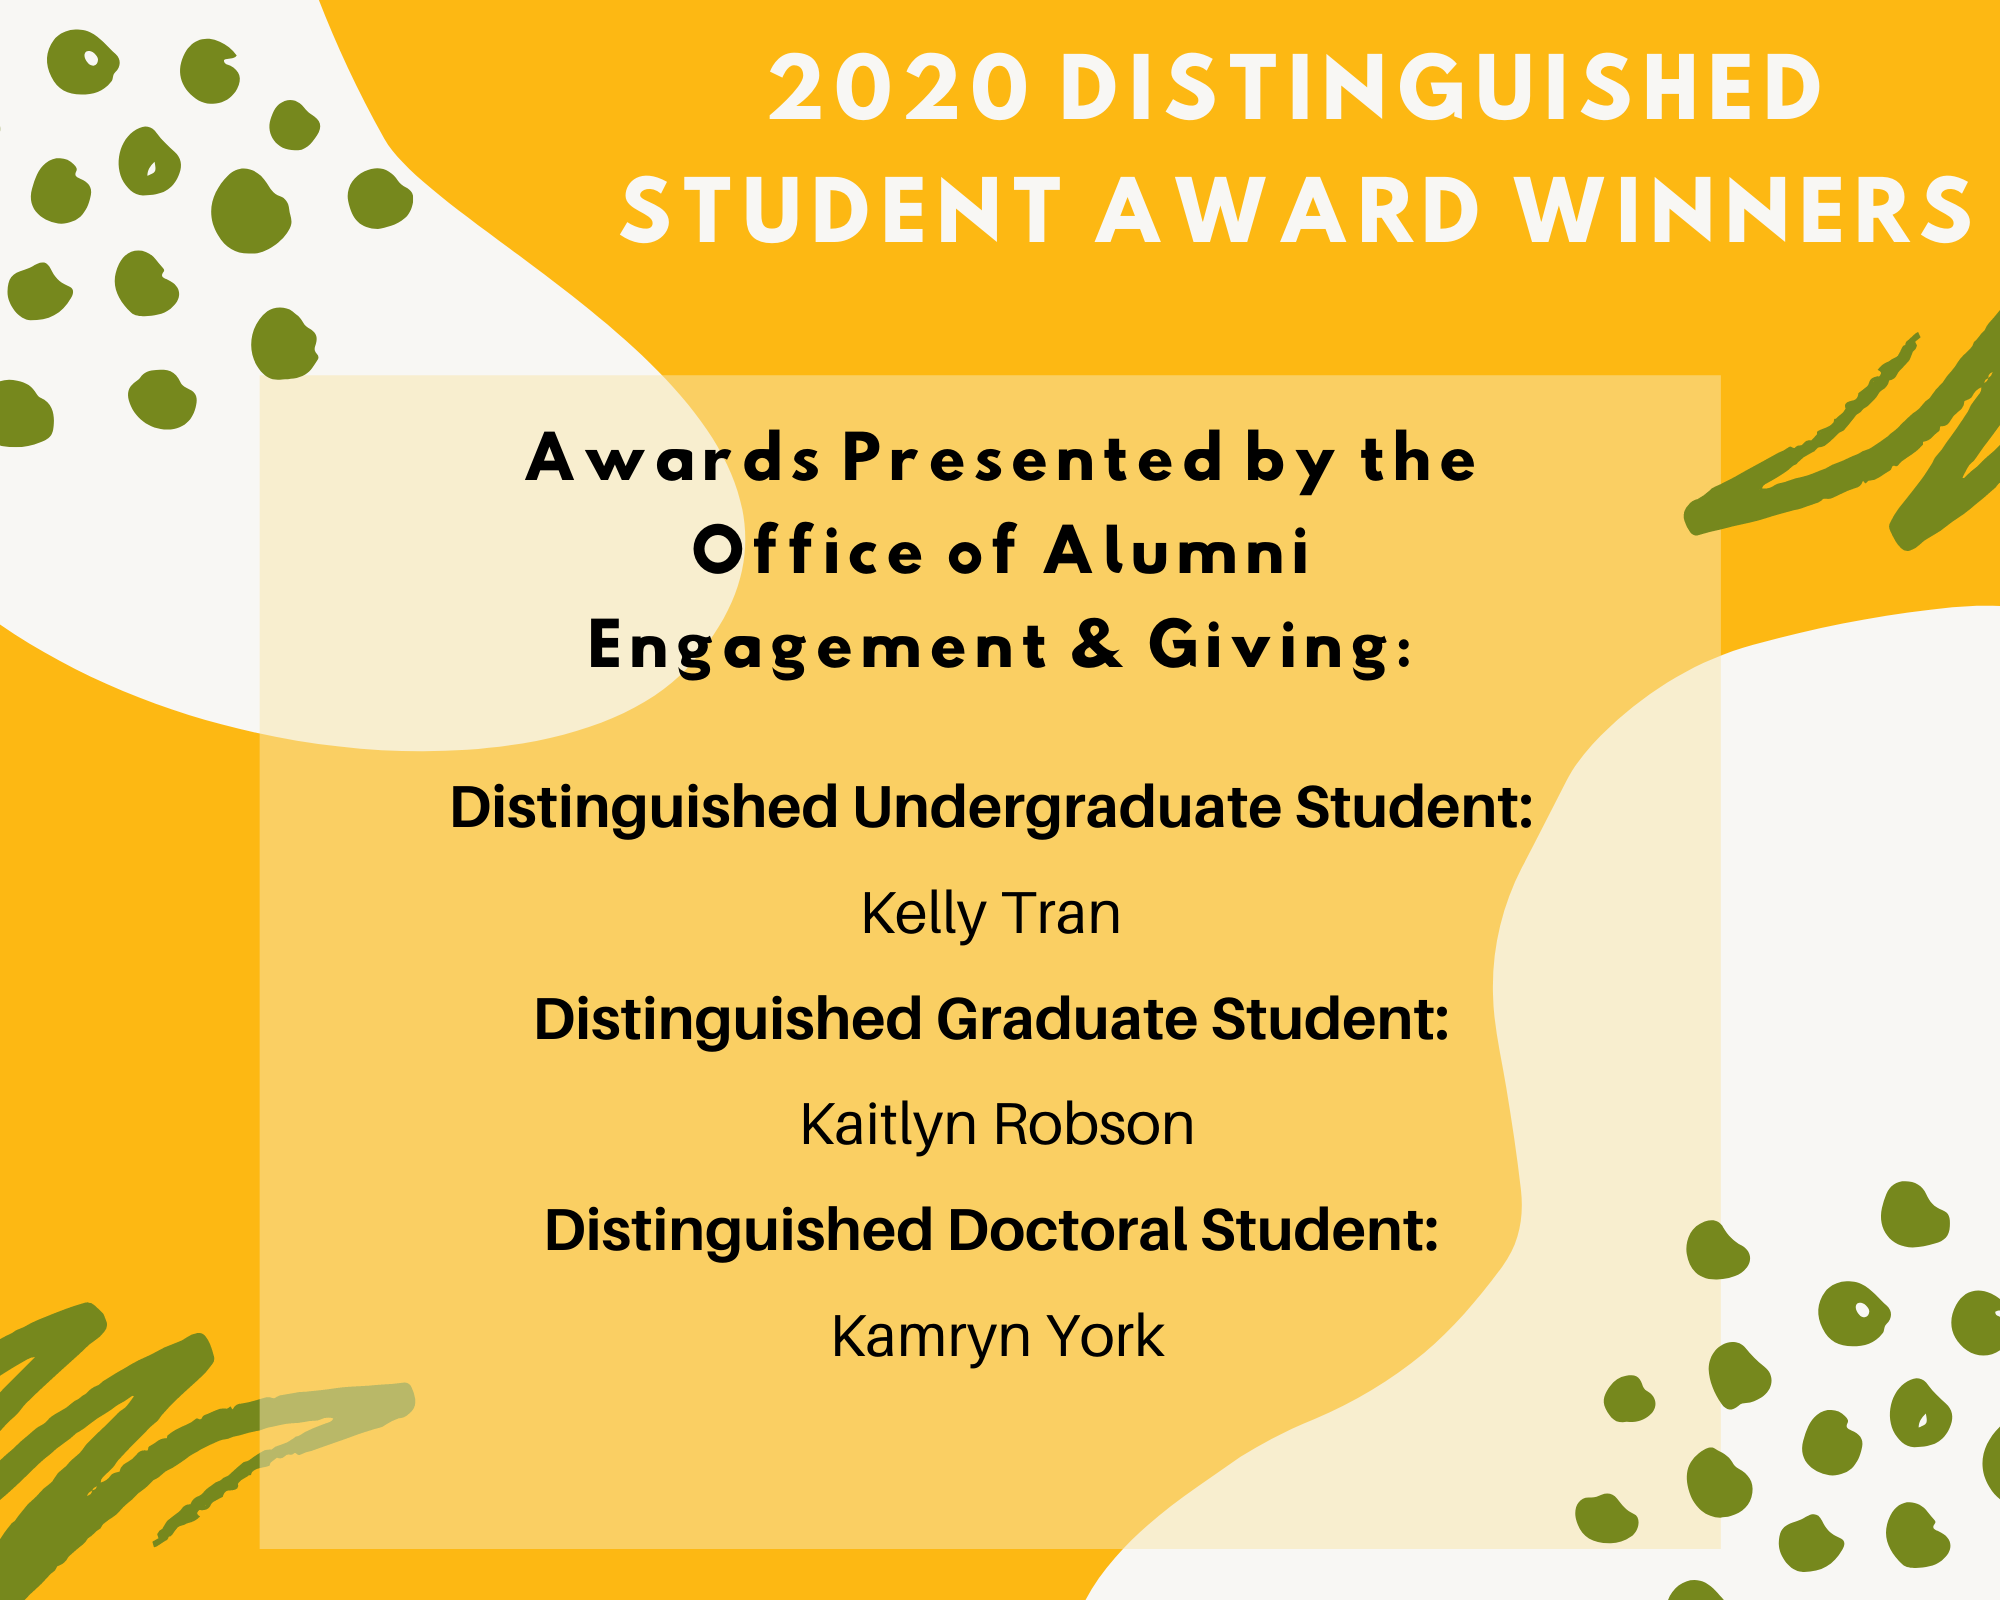 Graphic showing awardees of the Distinguished student Award. Undergraduate student awardee is Kelly Tran. Graduate student awardee is Kaitlyn Robinson. Doctoral student awardee is Kamryn York.